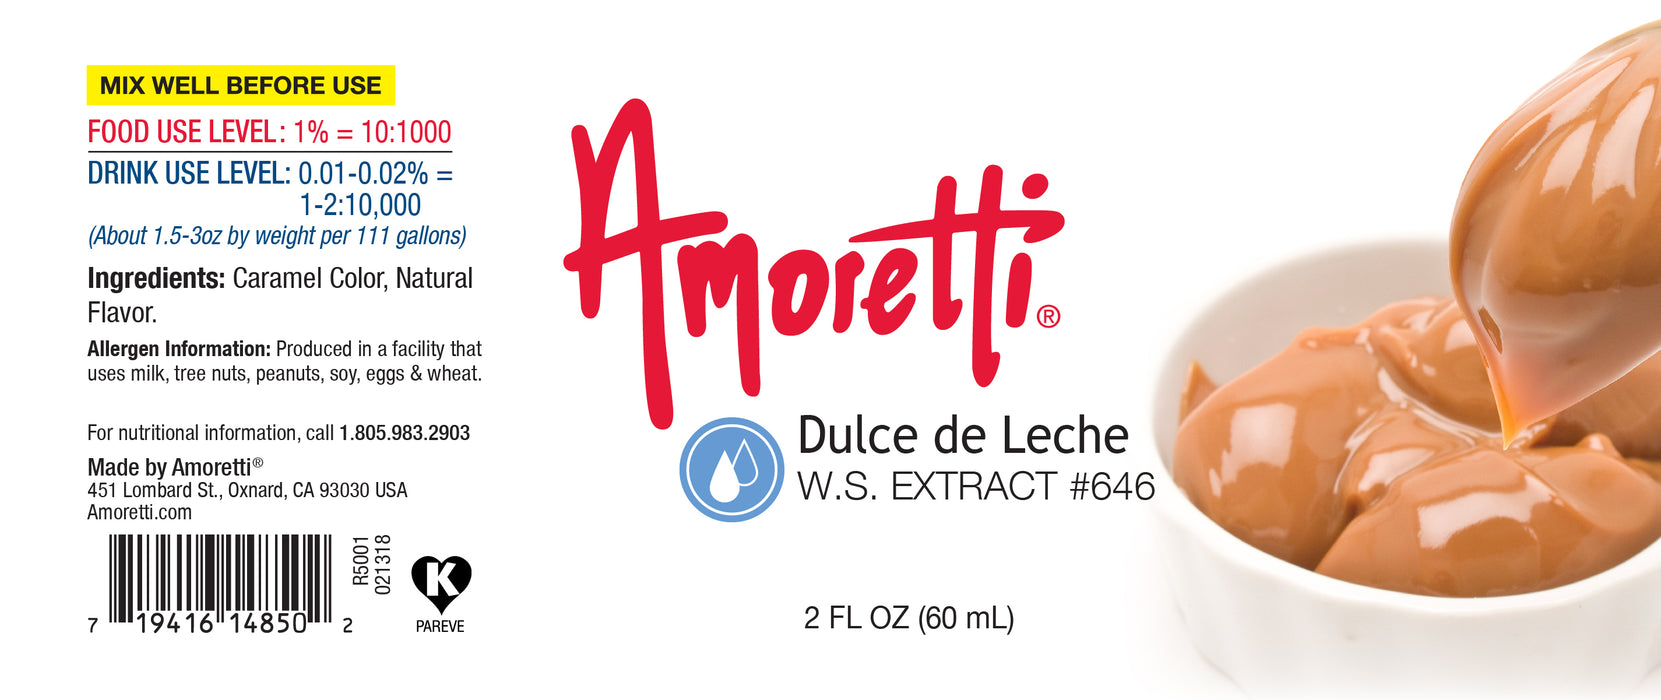 Dulce de Leche Extract Water Soluble